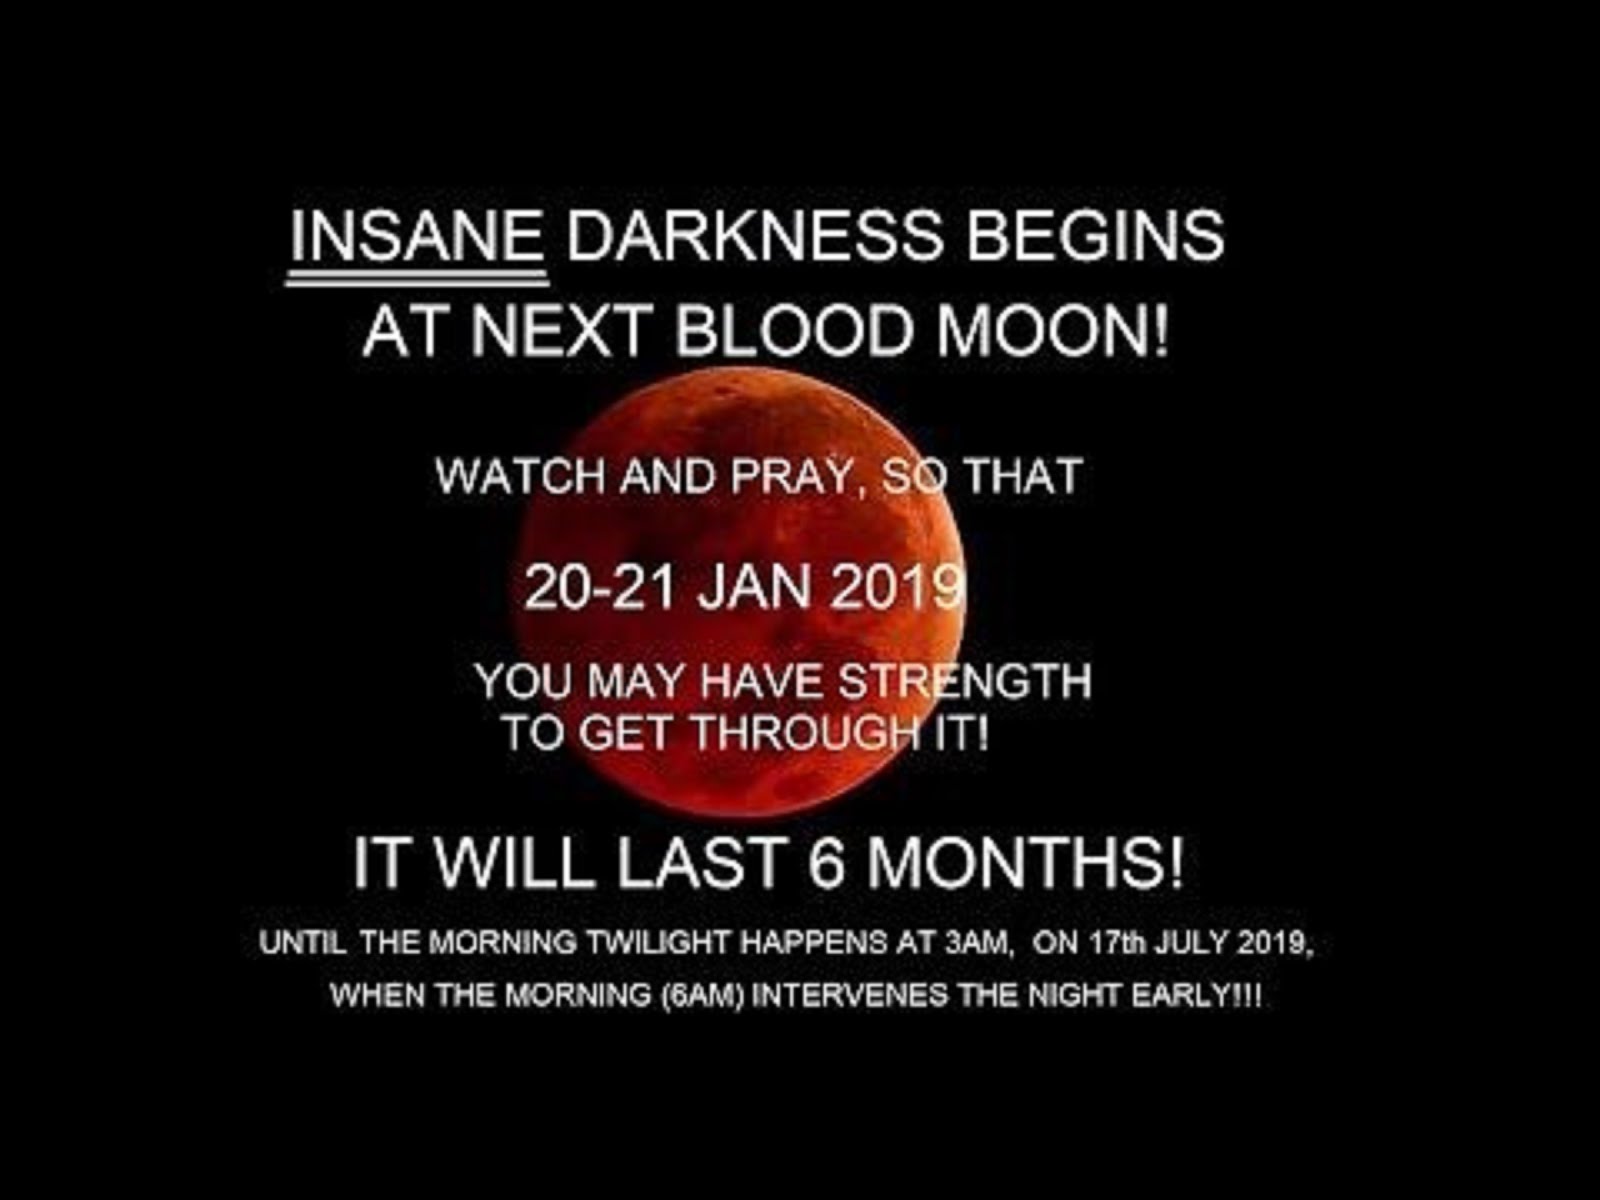 INSANE DARKNESS BEGINS AT 20-21 JAN 2019 LASTS FOR SIX MONTHS!